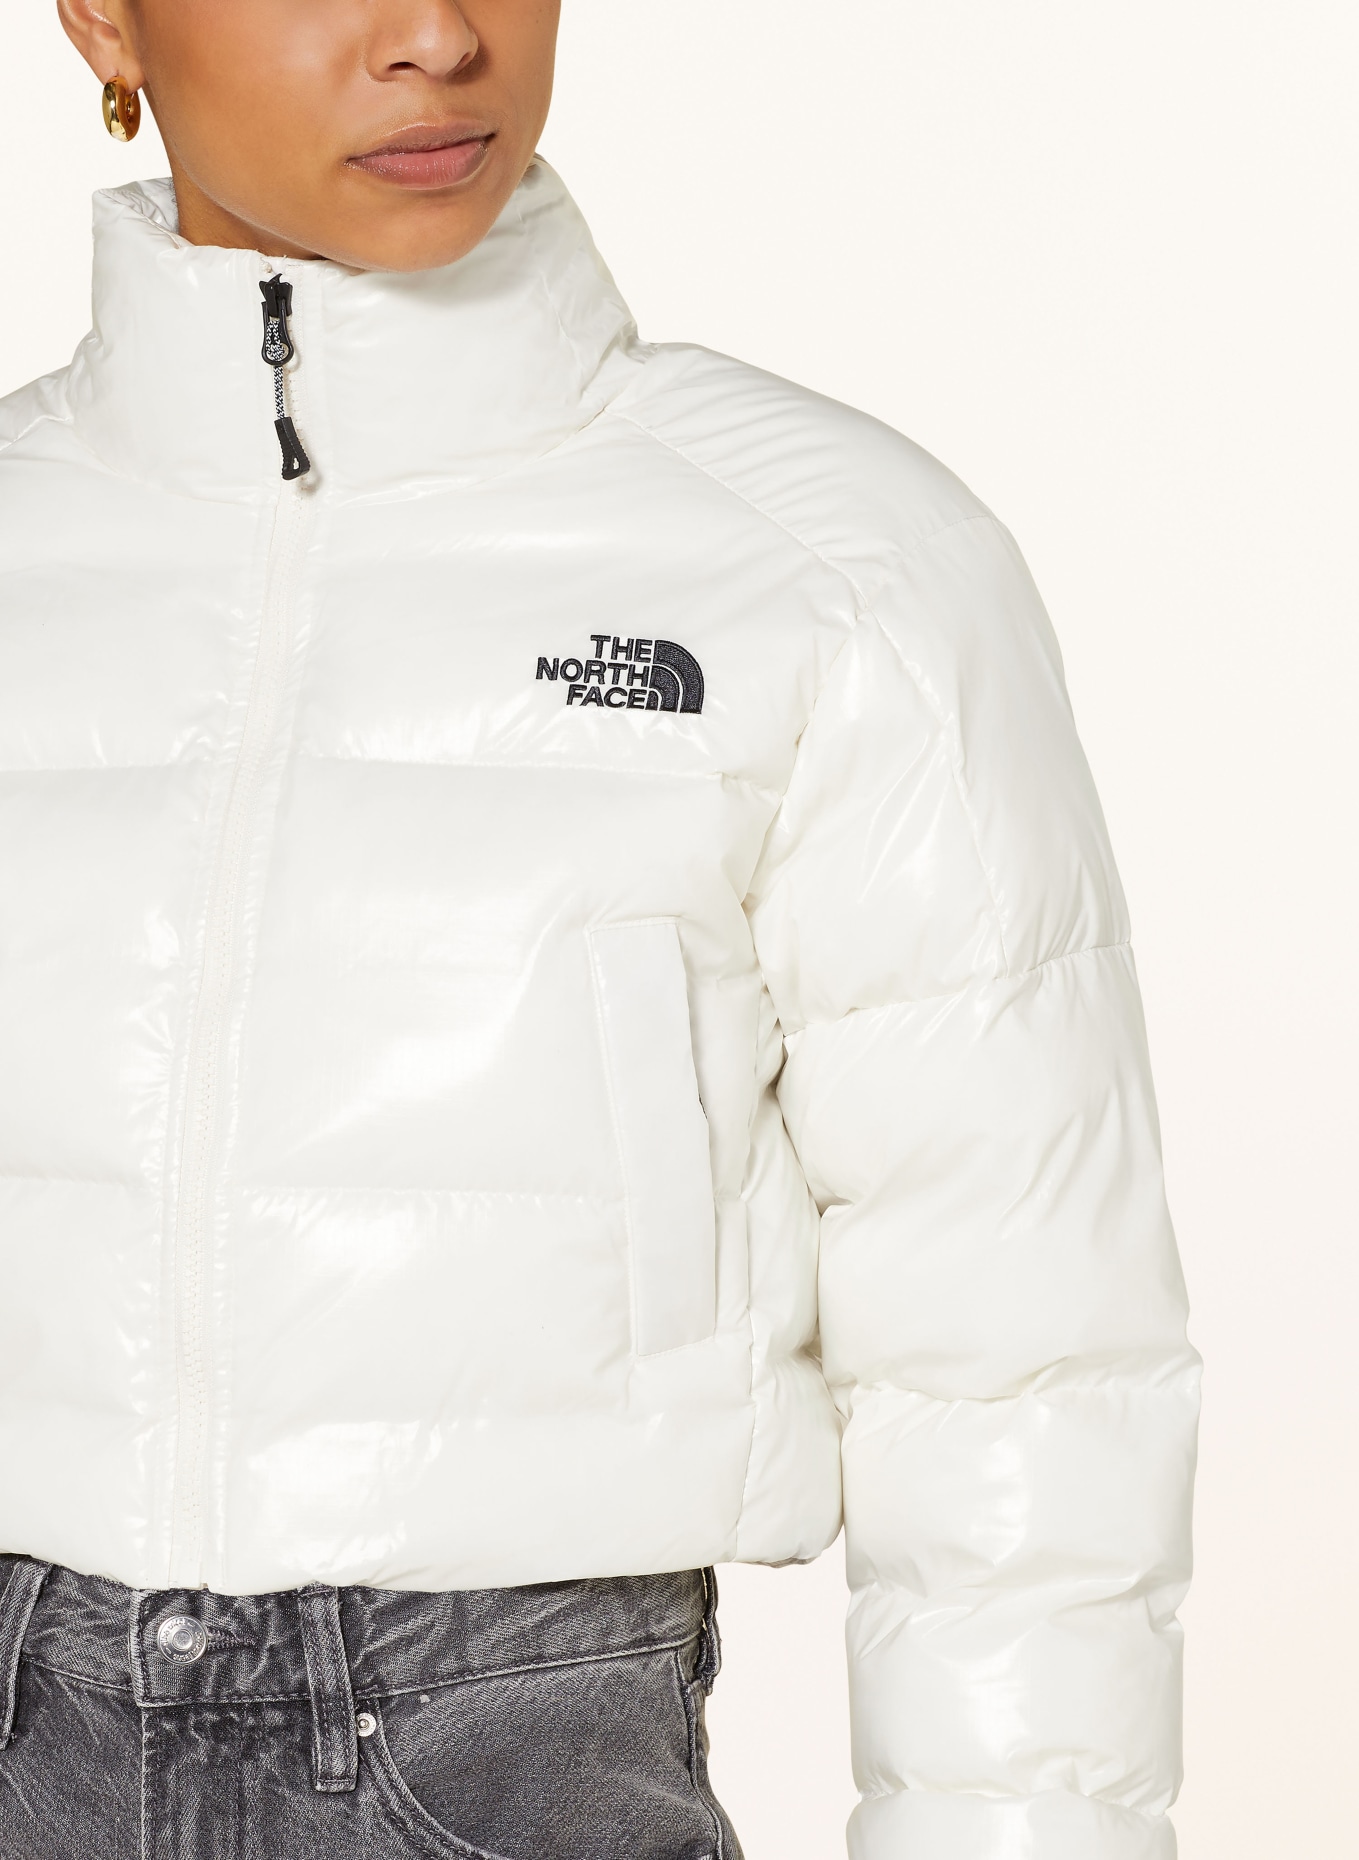 THE NORTH FACE Cropped-Steppjacke RUSTA 2.0, Farbe: WEISS (Bild 4)